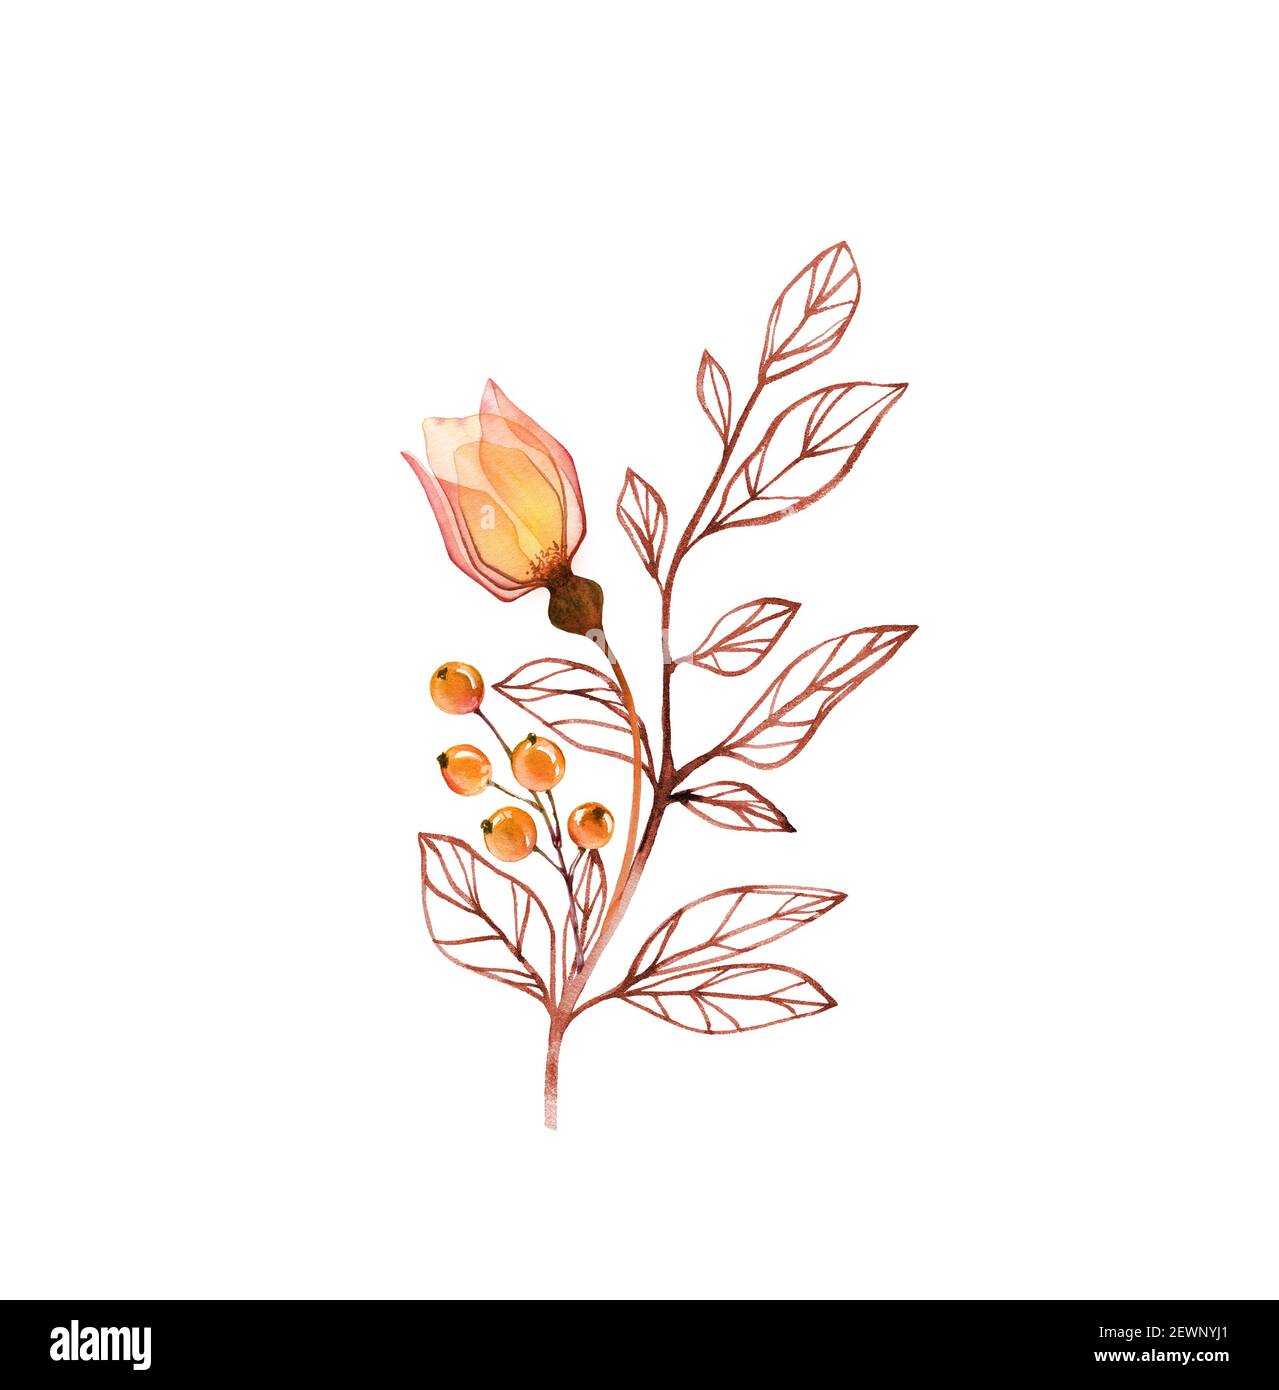 Watercolor Rose plant. Transparent orange flower with branch and berries isolated on white. Hand painted abstract arrangement. Botanical illustration Stock Photo